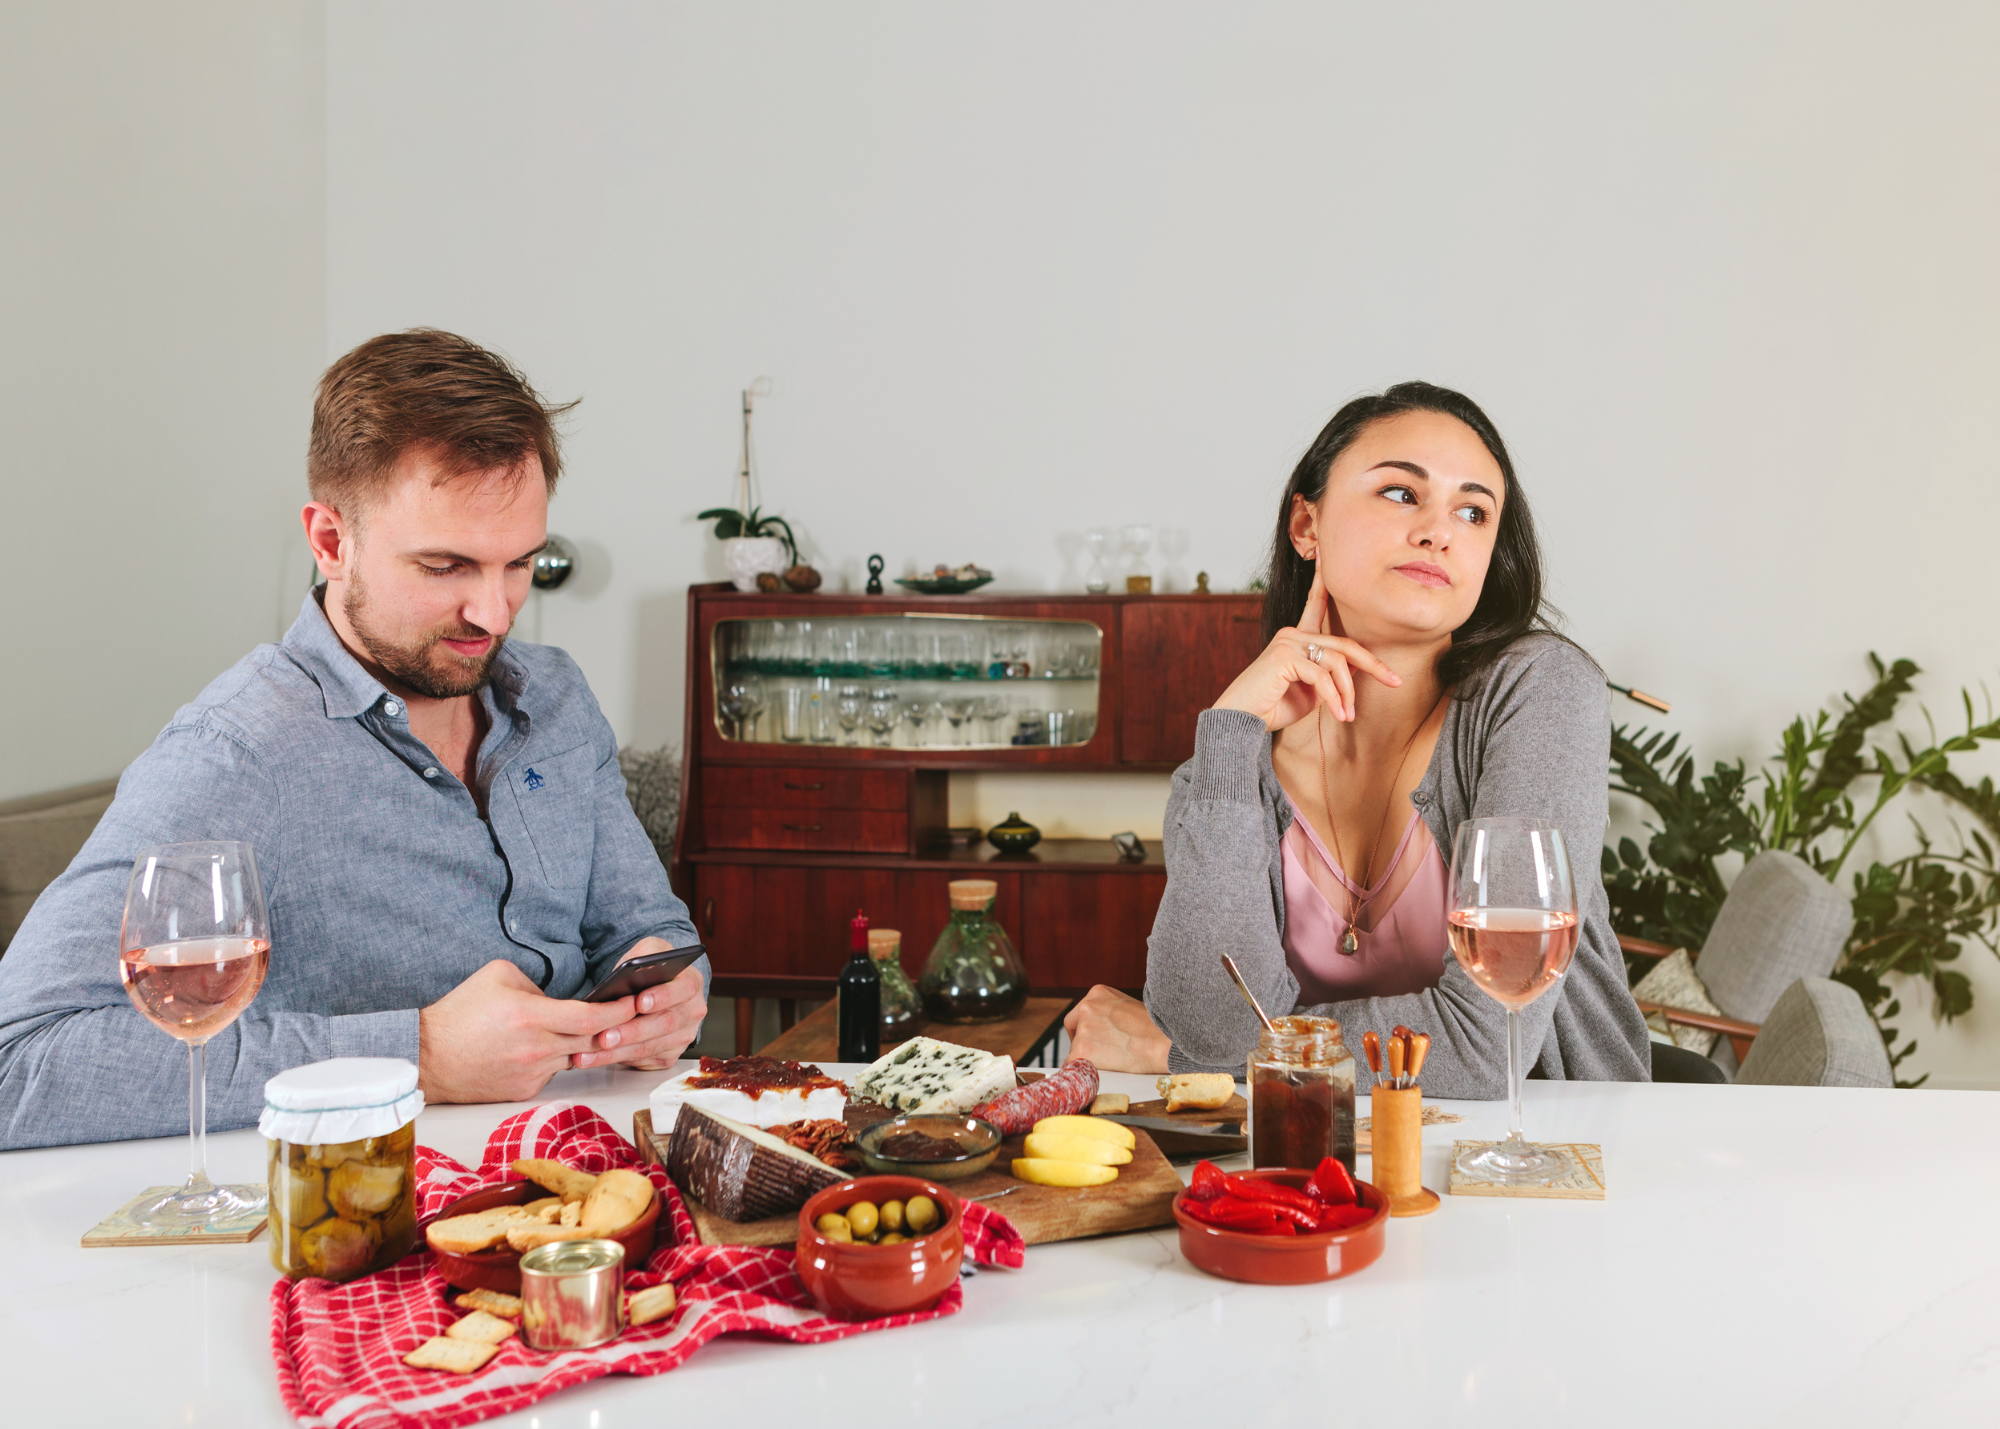 man and woman sitting at table looking disappointed with each other